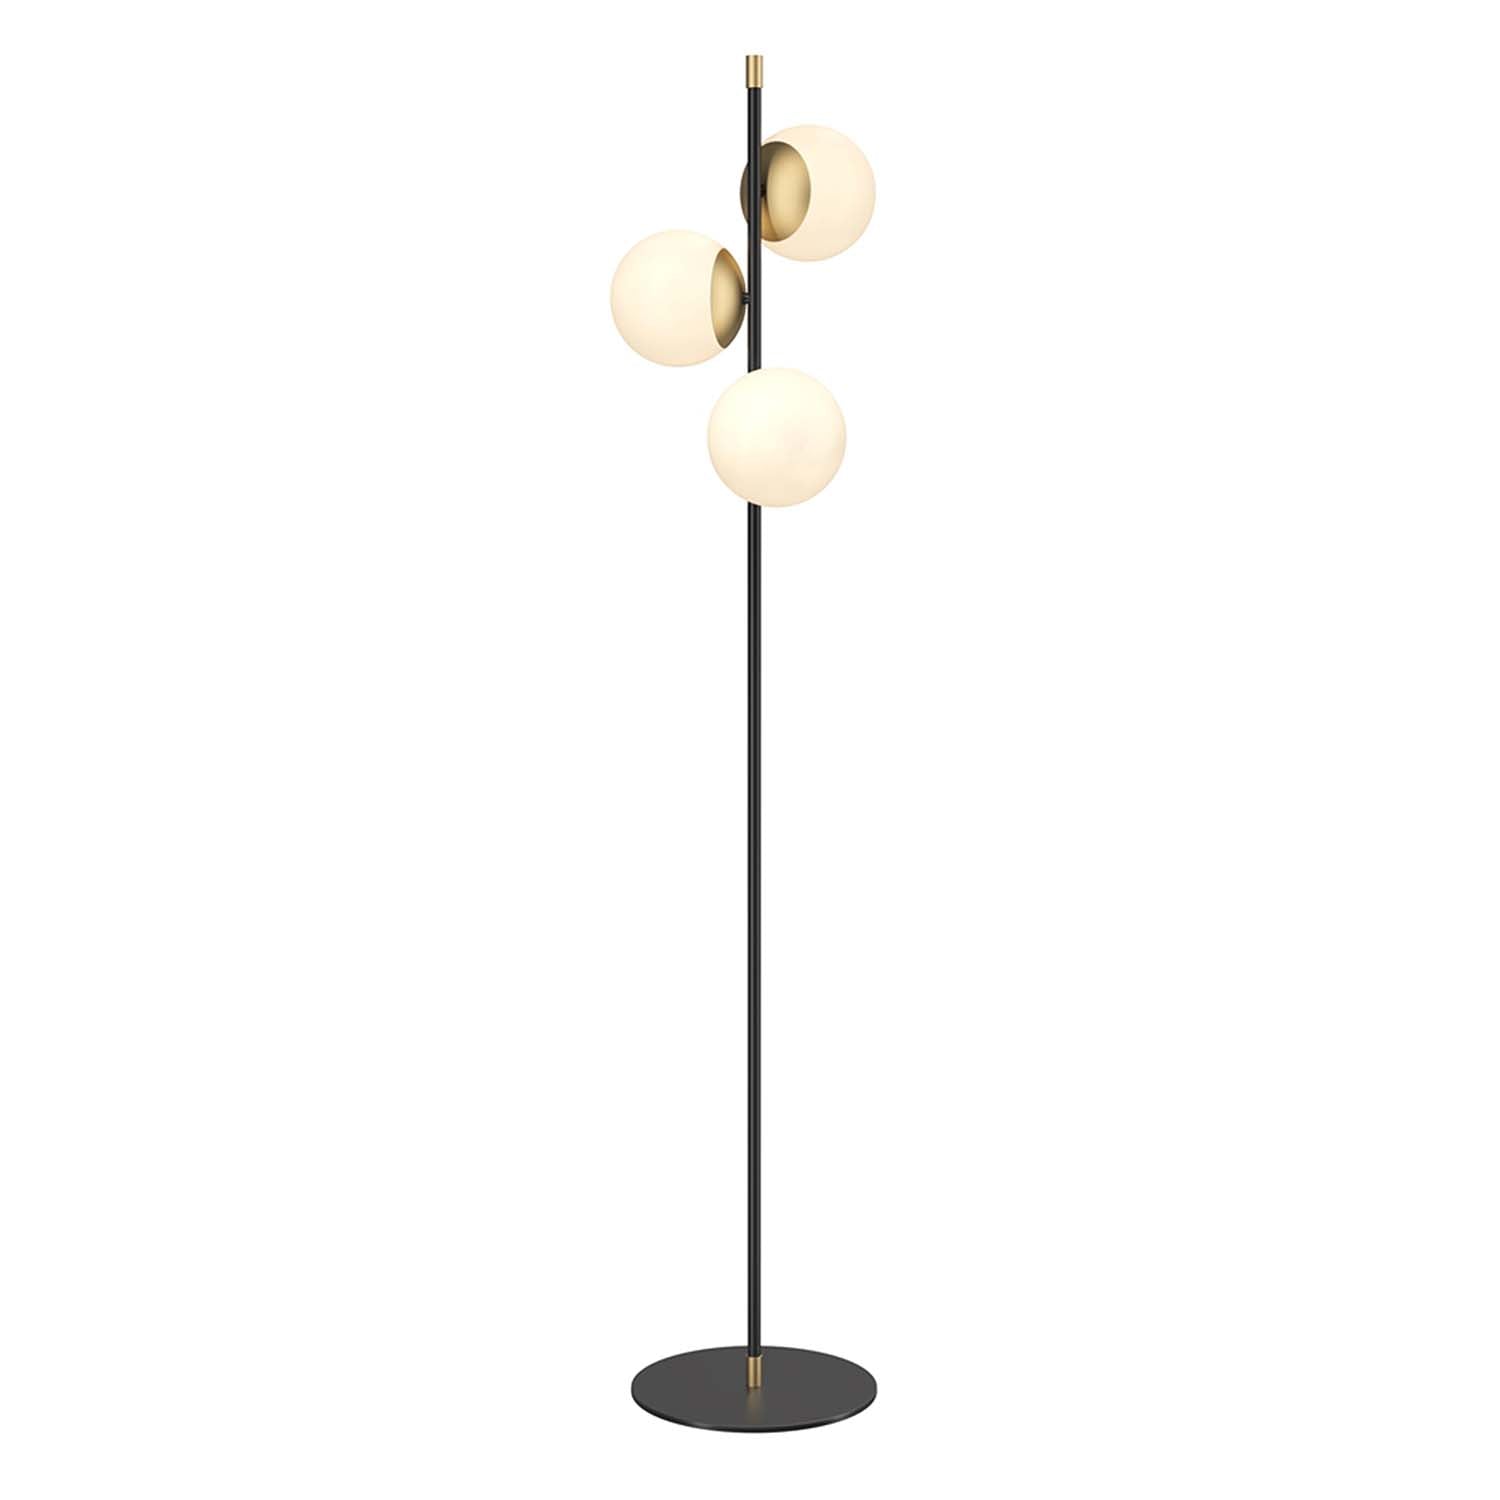 NOSTALGIA - Art Deco floor lamp with glass balls, gold and black